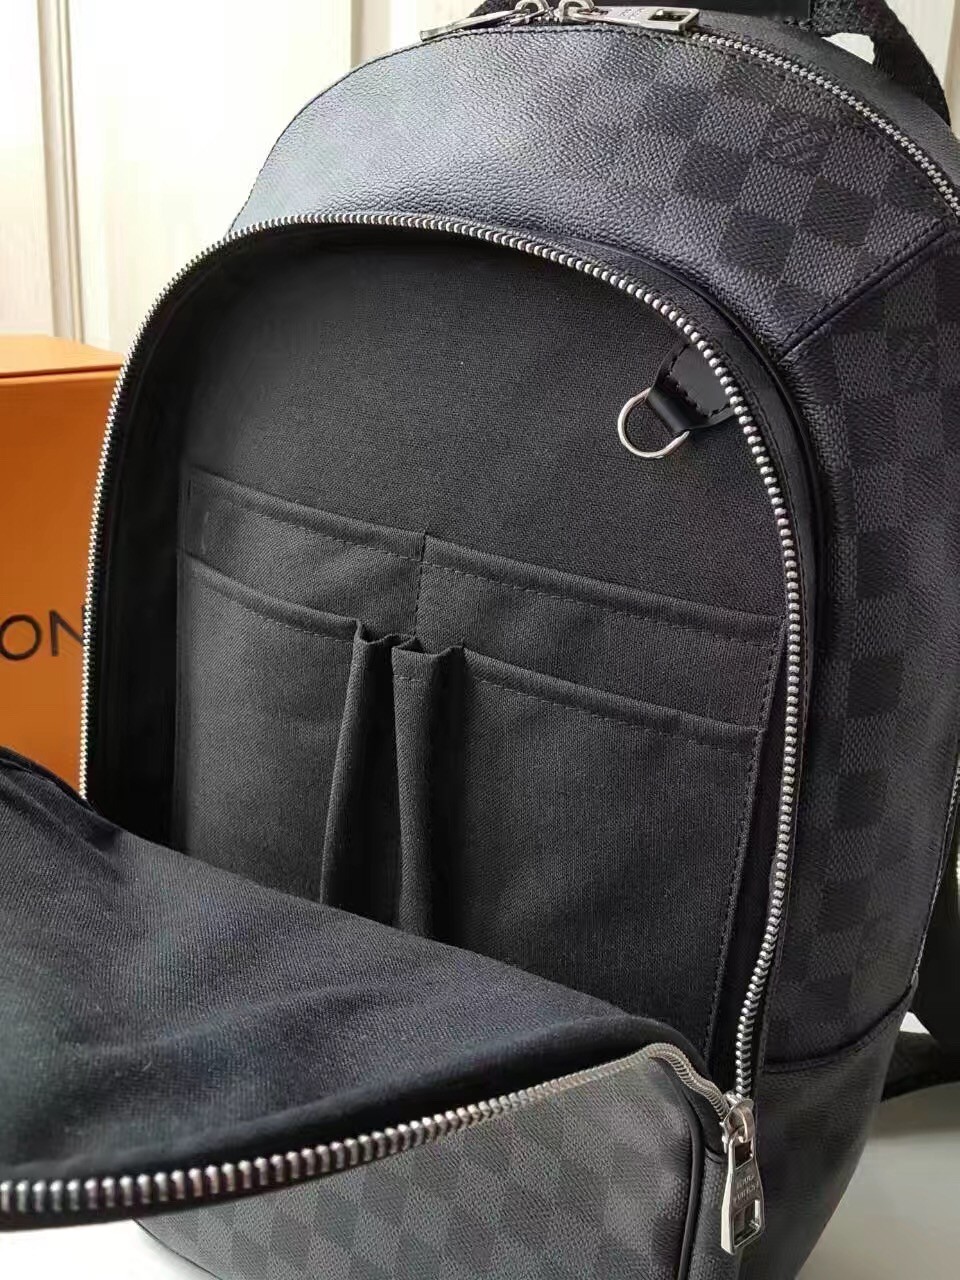 Replica Louis Vuitton Utility Backpack In Damier Graphite Canvas